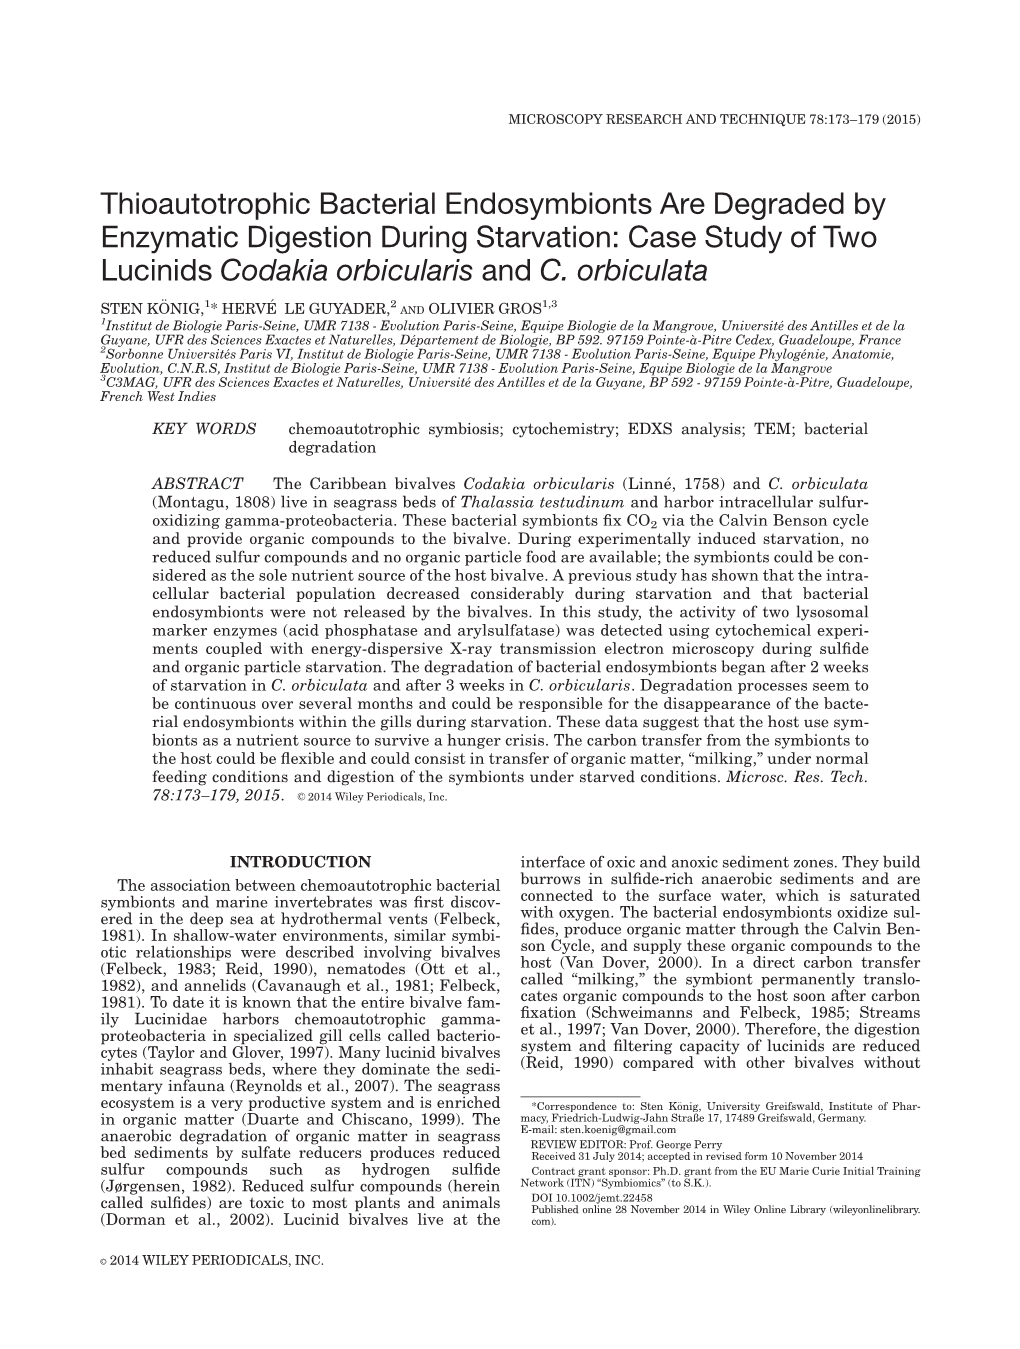 Thioautotrophic Bacterial Endosymbionts Are Degraded by Enzymatic Digestion During Starvation: Case Study of Two Lucinids Codakia Orbicularis and C